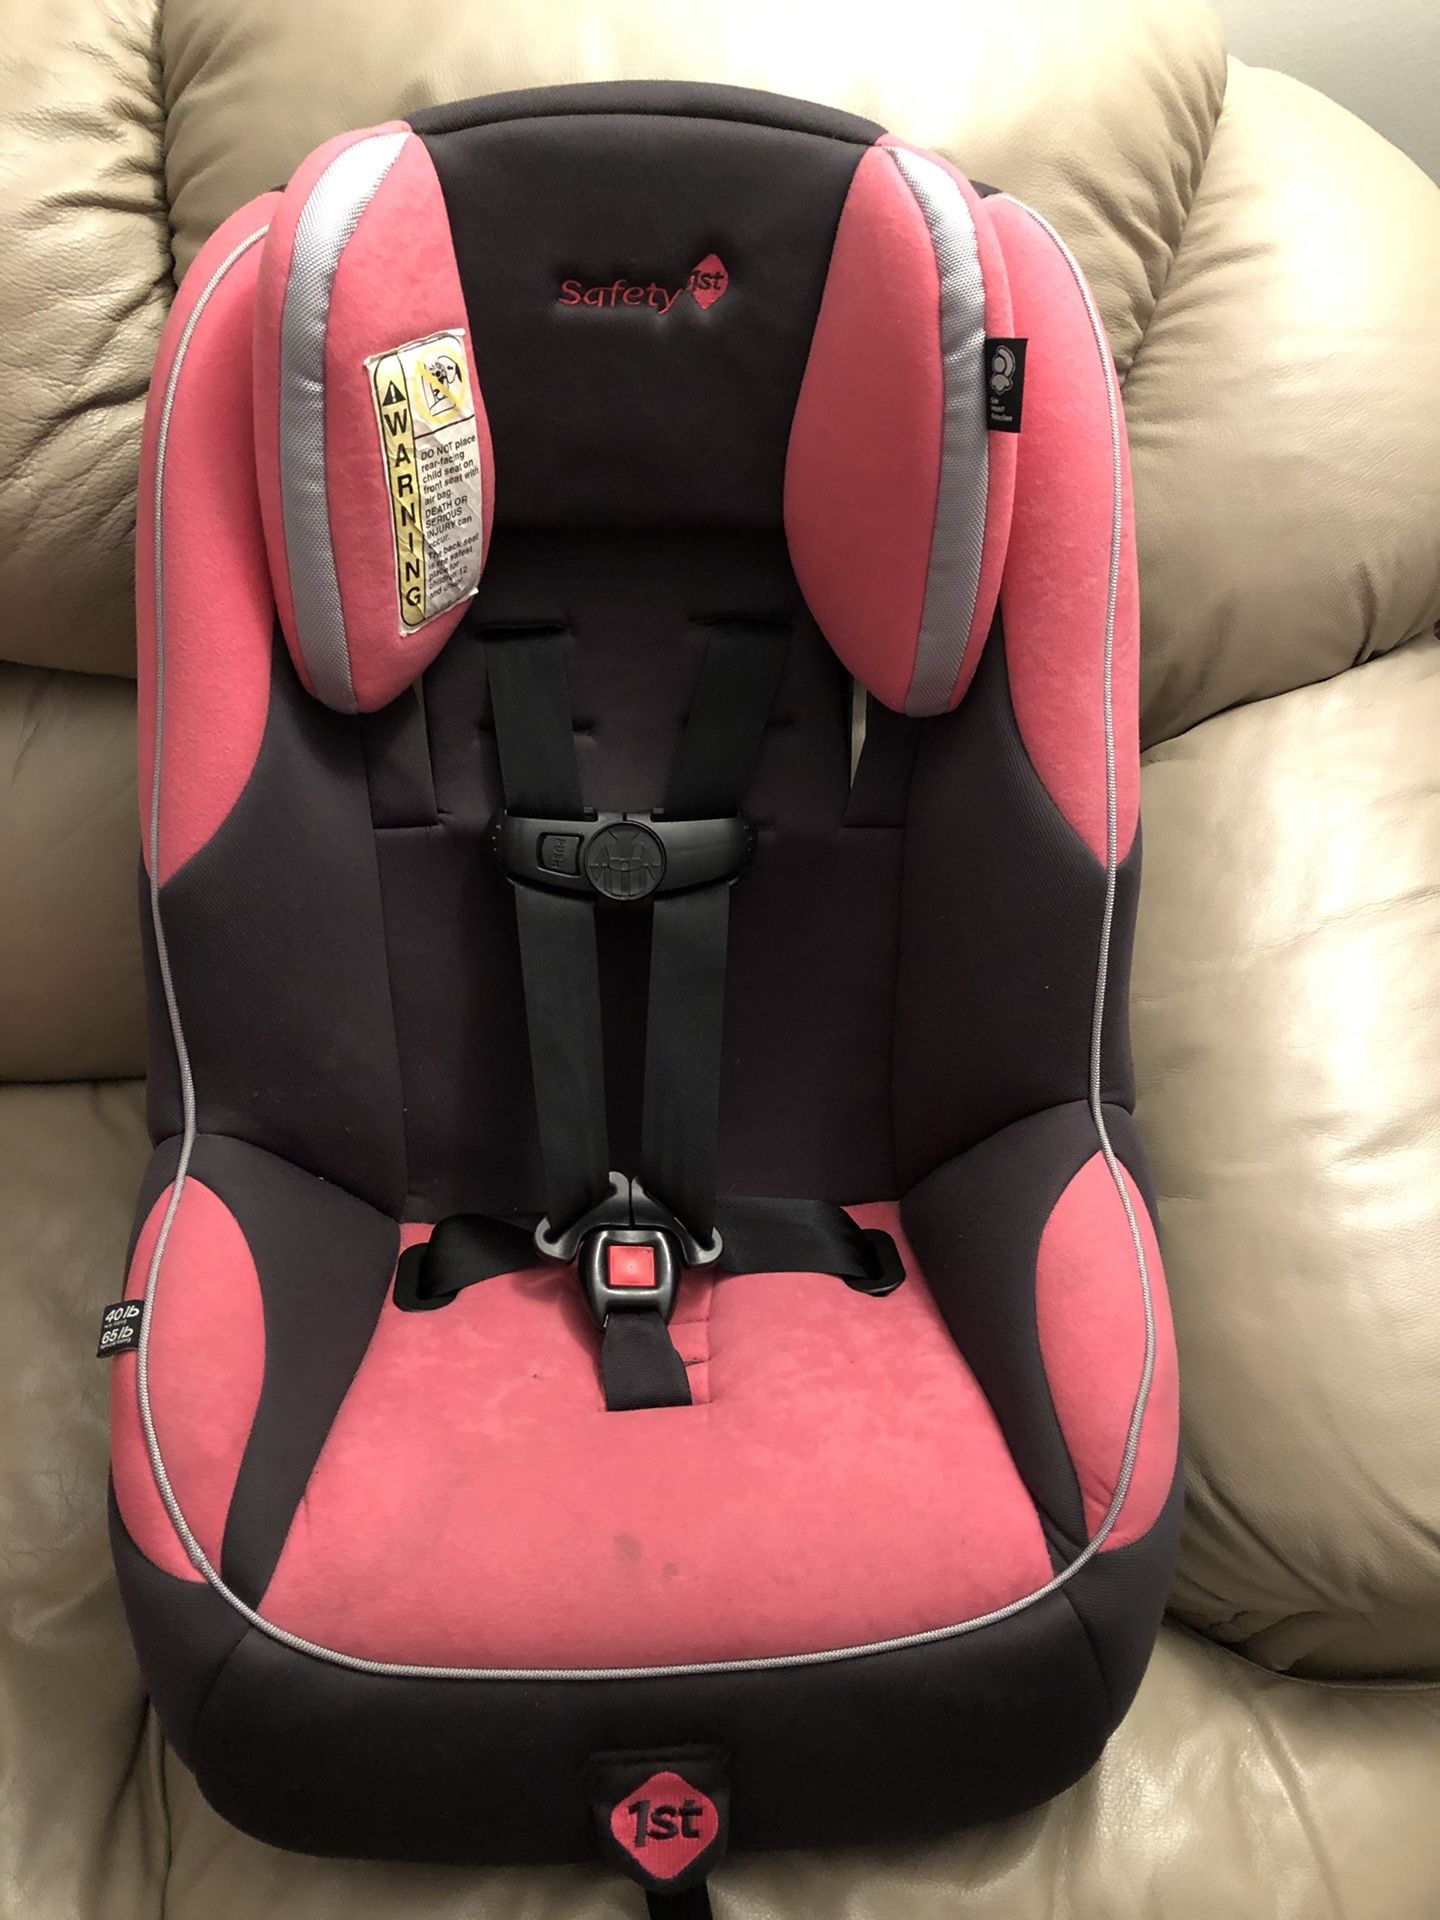 Safety 1st toddler car seat (used) 40-65 pounds